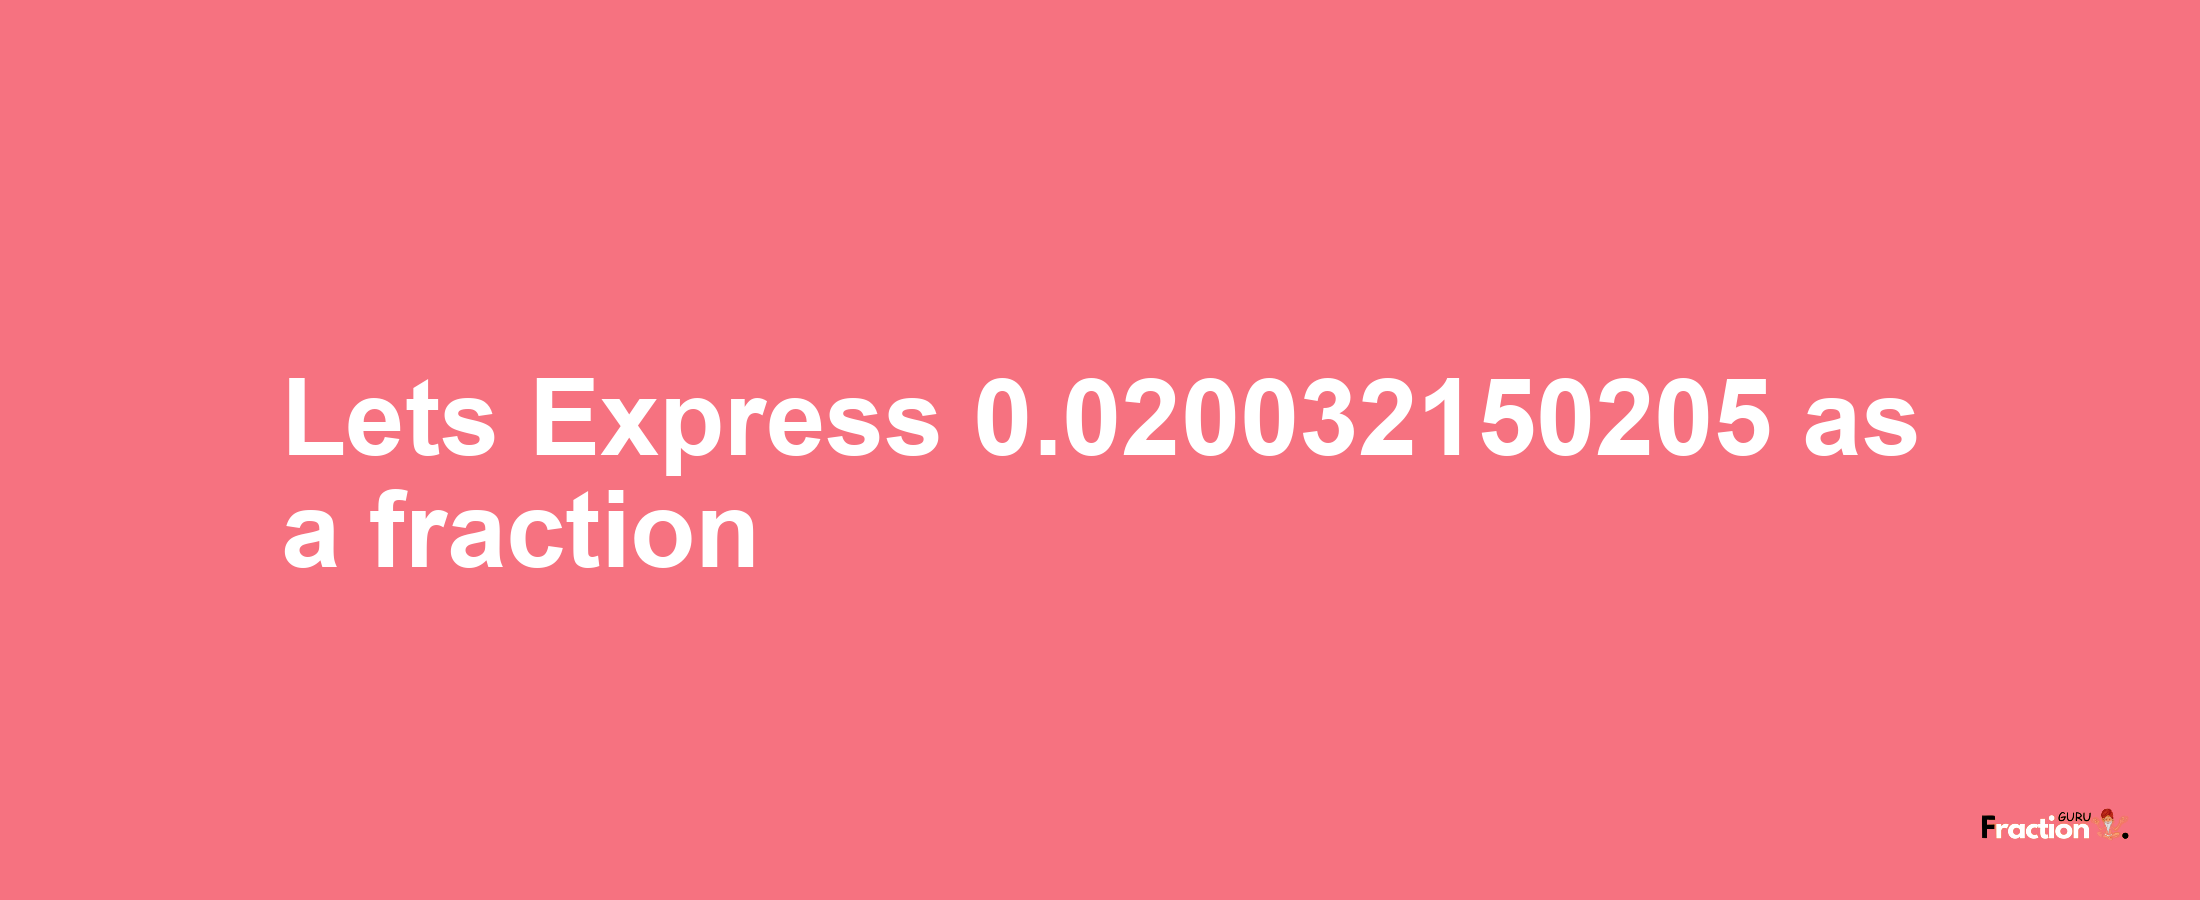 Lets Express 0.020032150205 as afraction